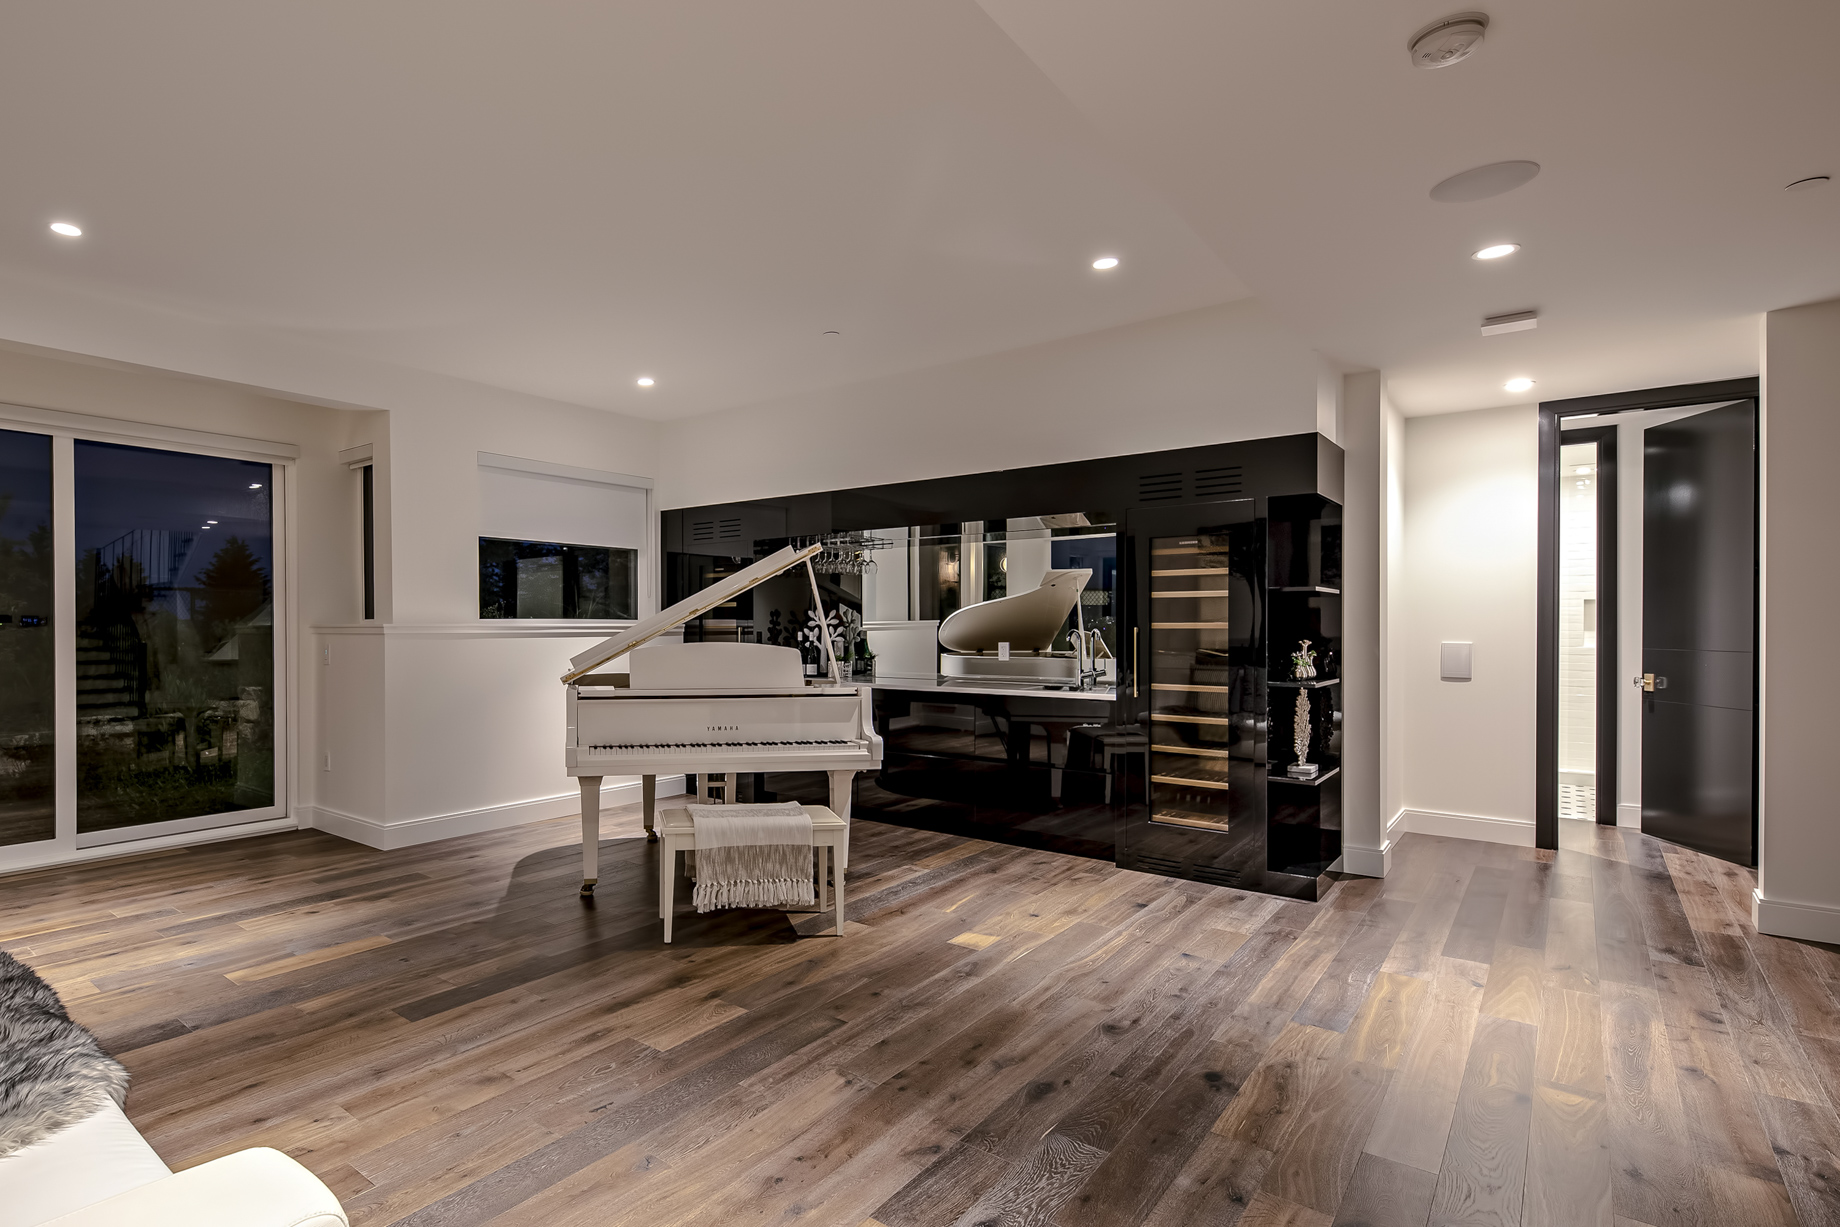 2121 Union Court, West Vancouver, BC, Canada - Entertainment Room - Luxury Real Estate - West Coast Modern Home